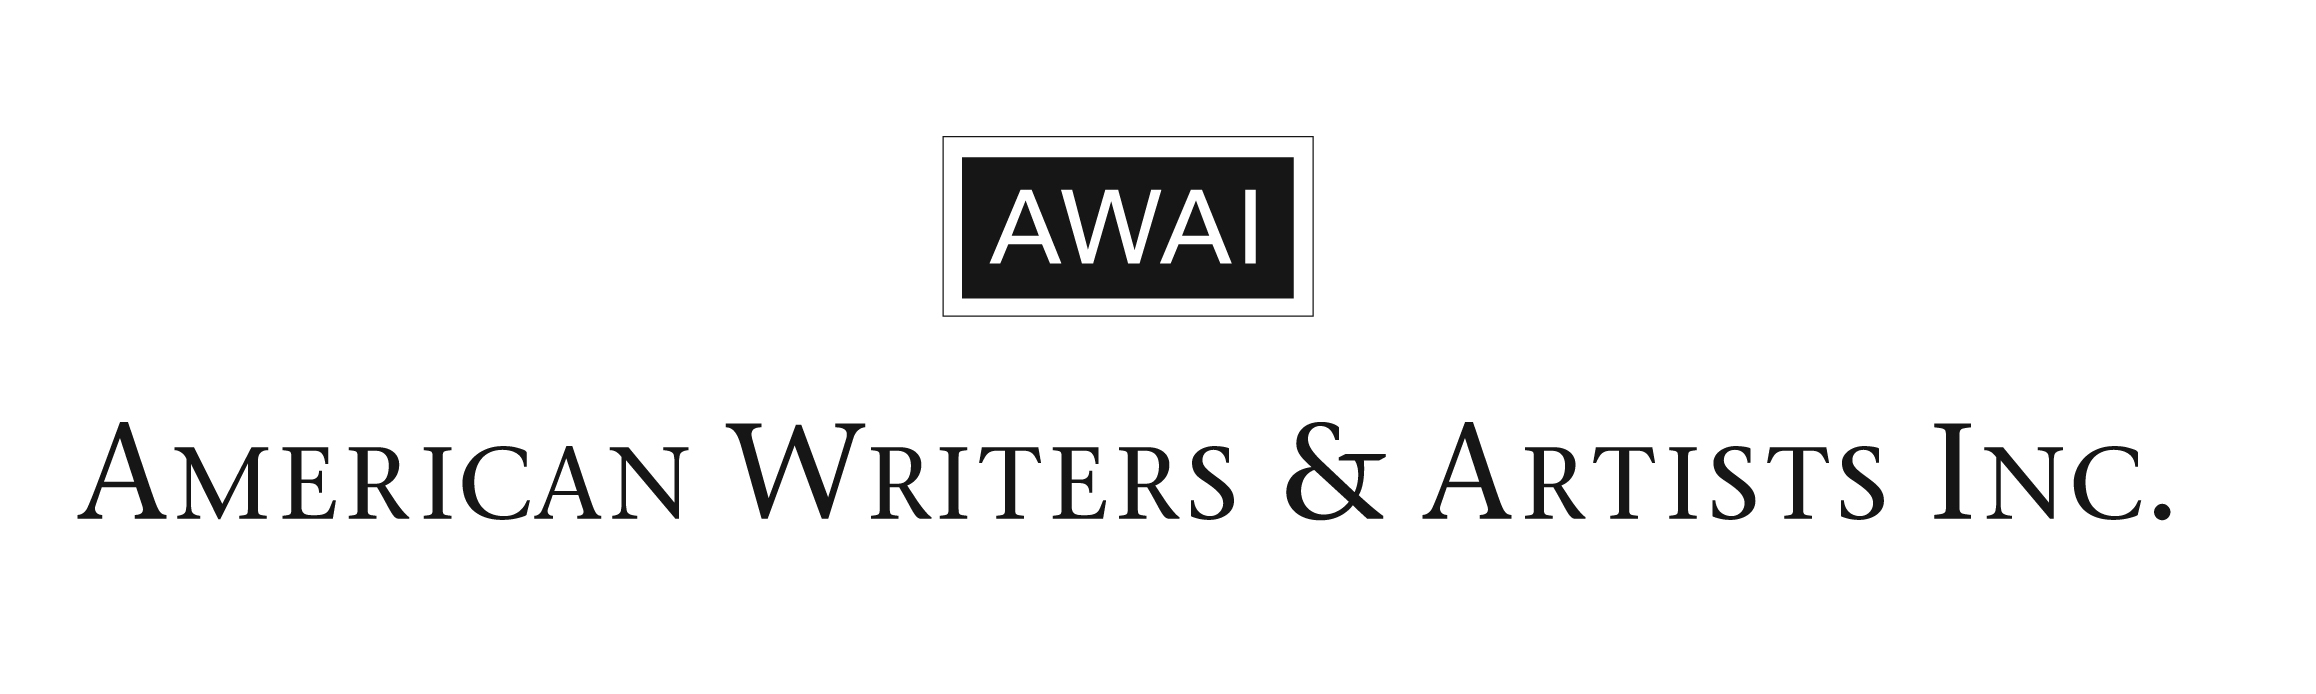 AWAI Updates and Expands Its Flagship Accelerated Program